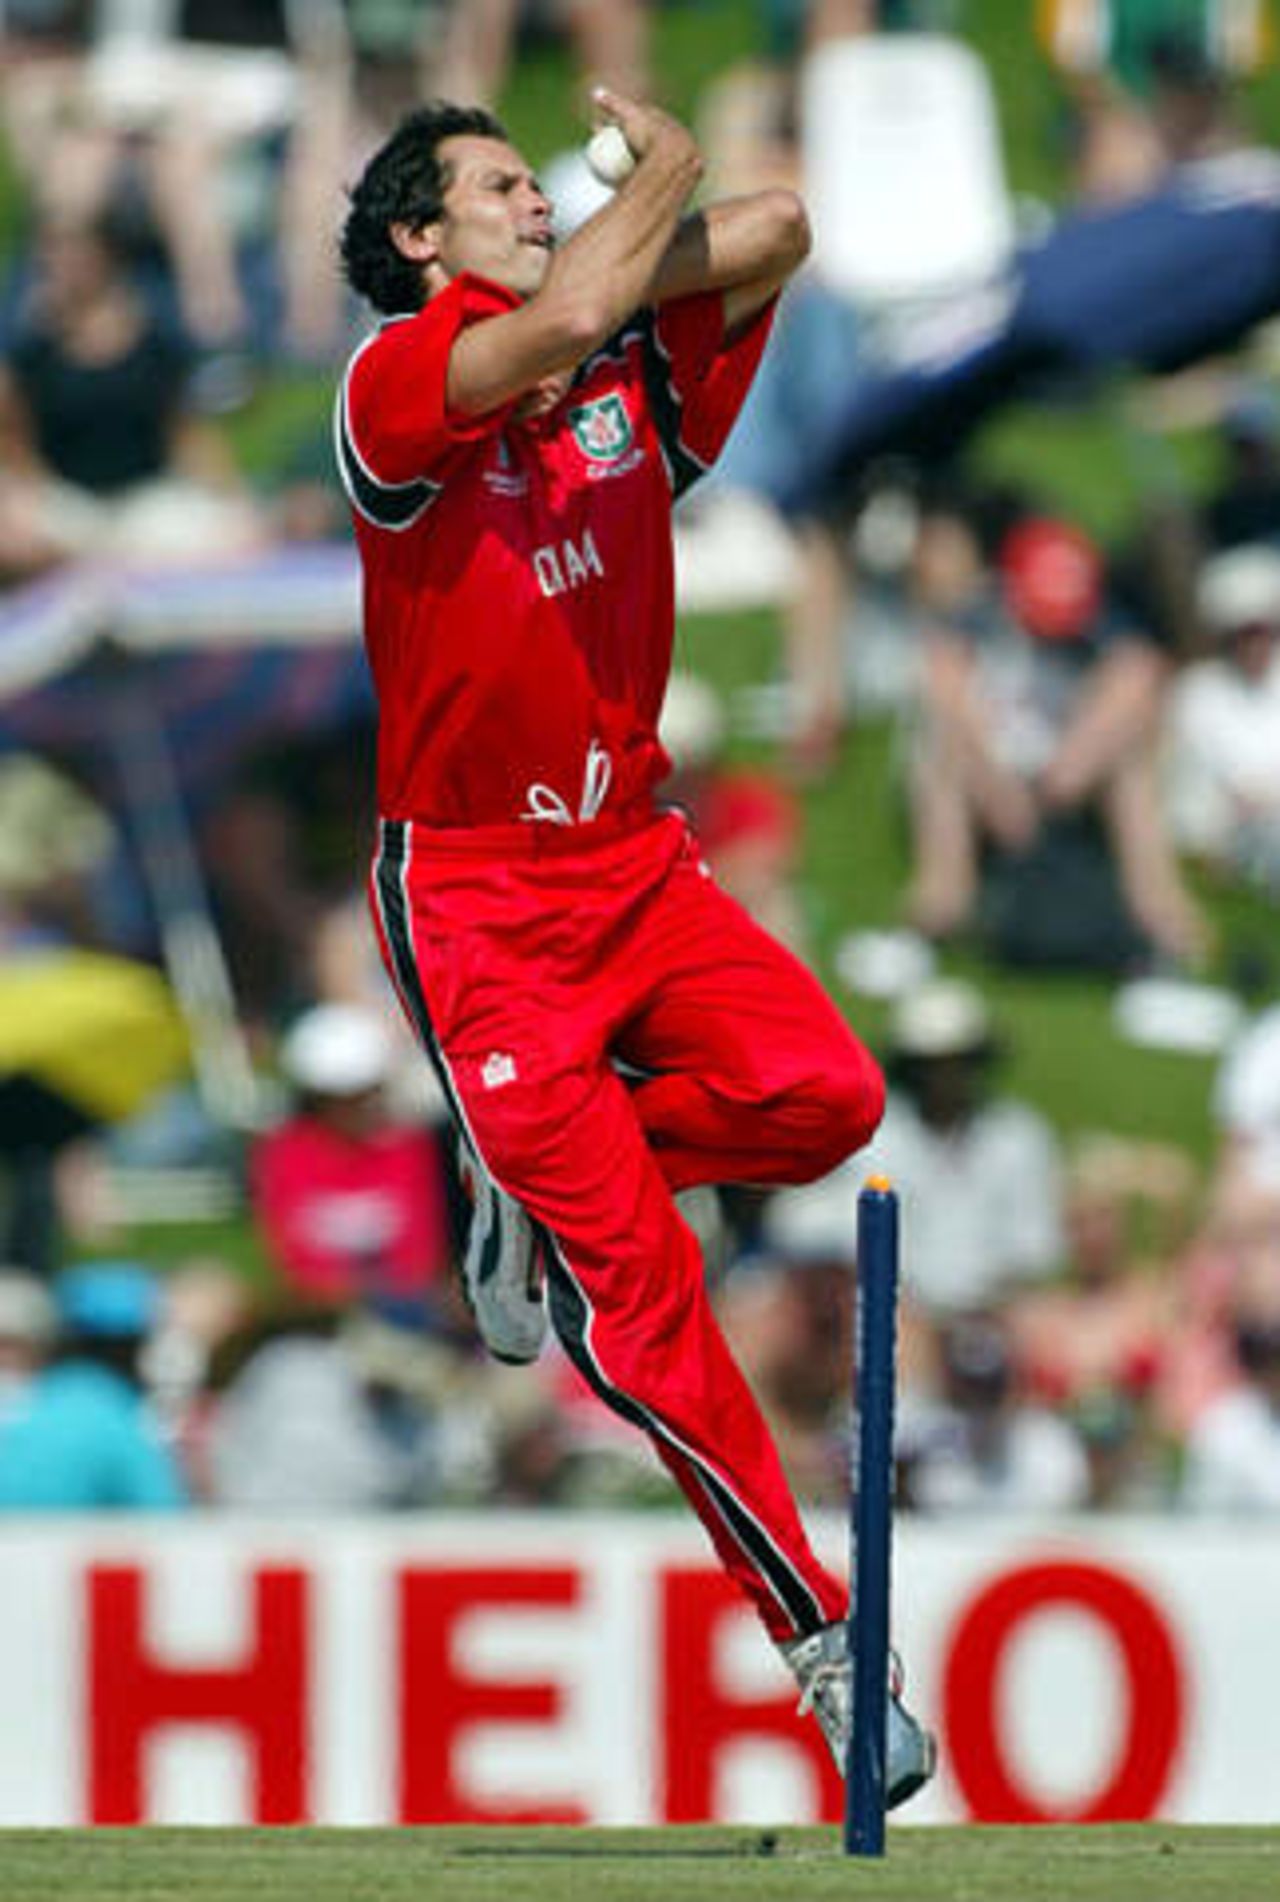 World Cup, 2003 - Canada v West Indies at Centurion, 23rd February 2003